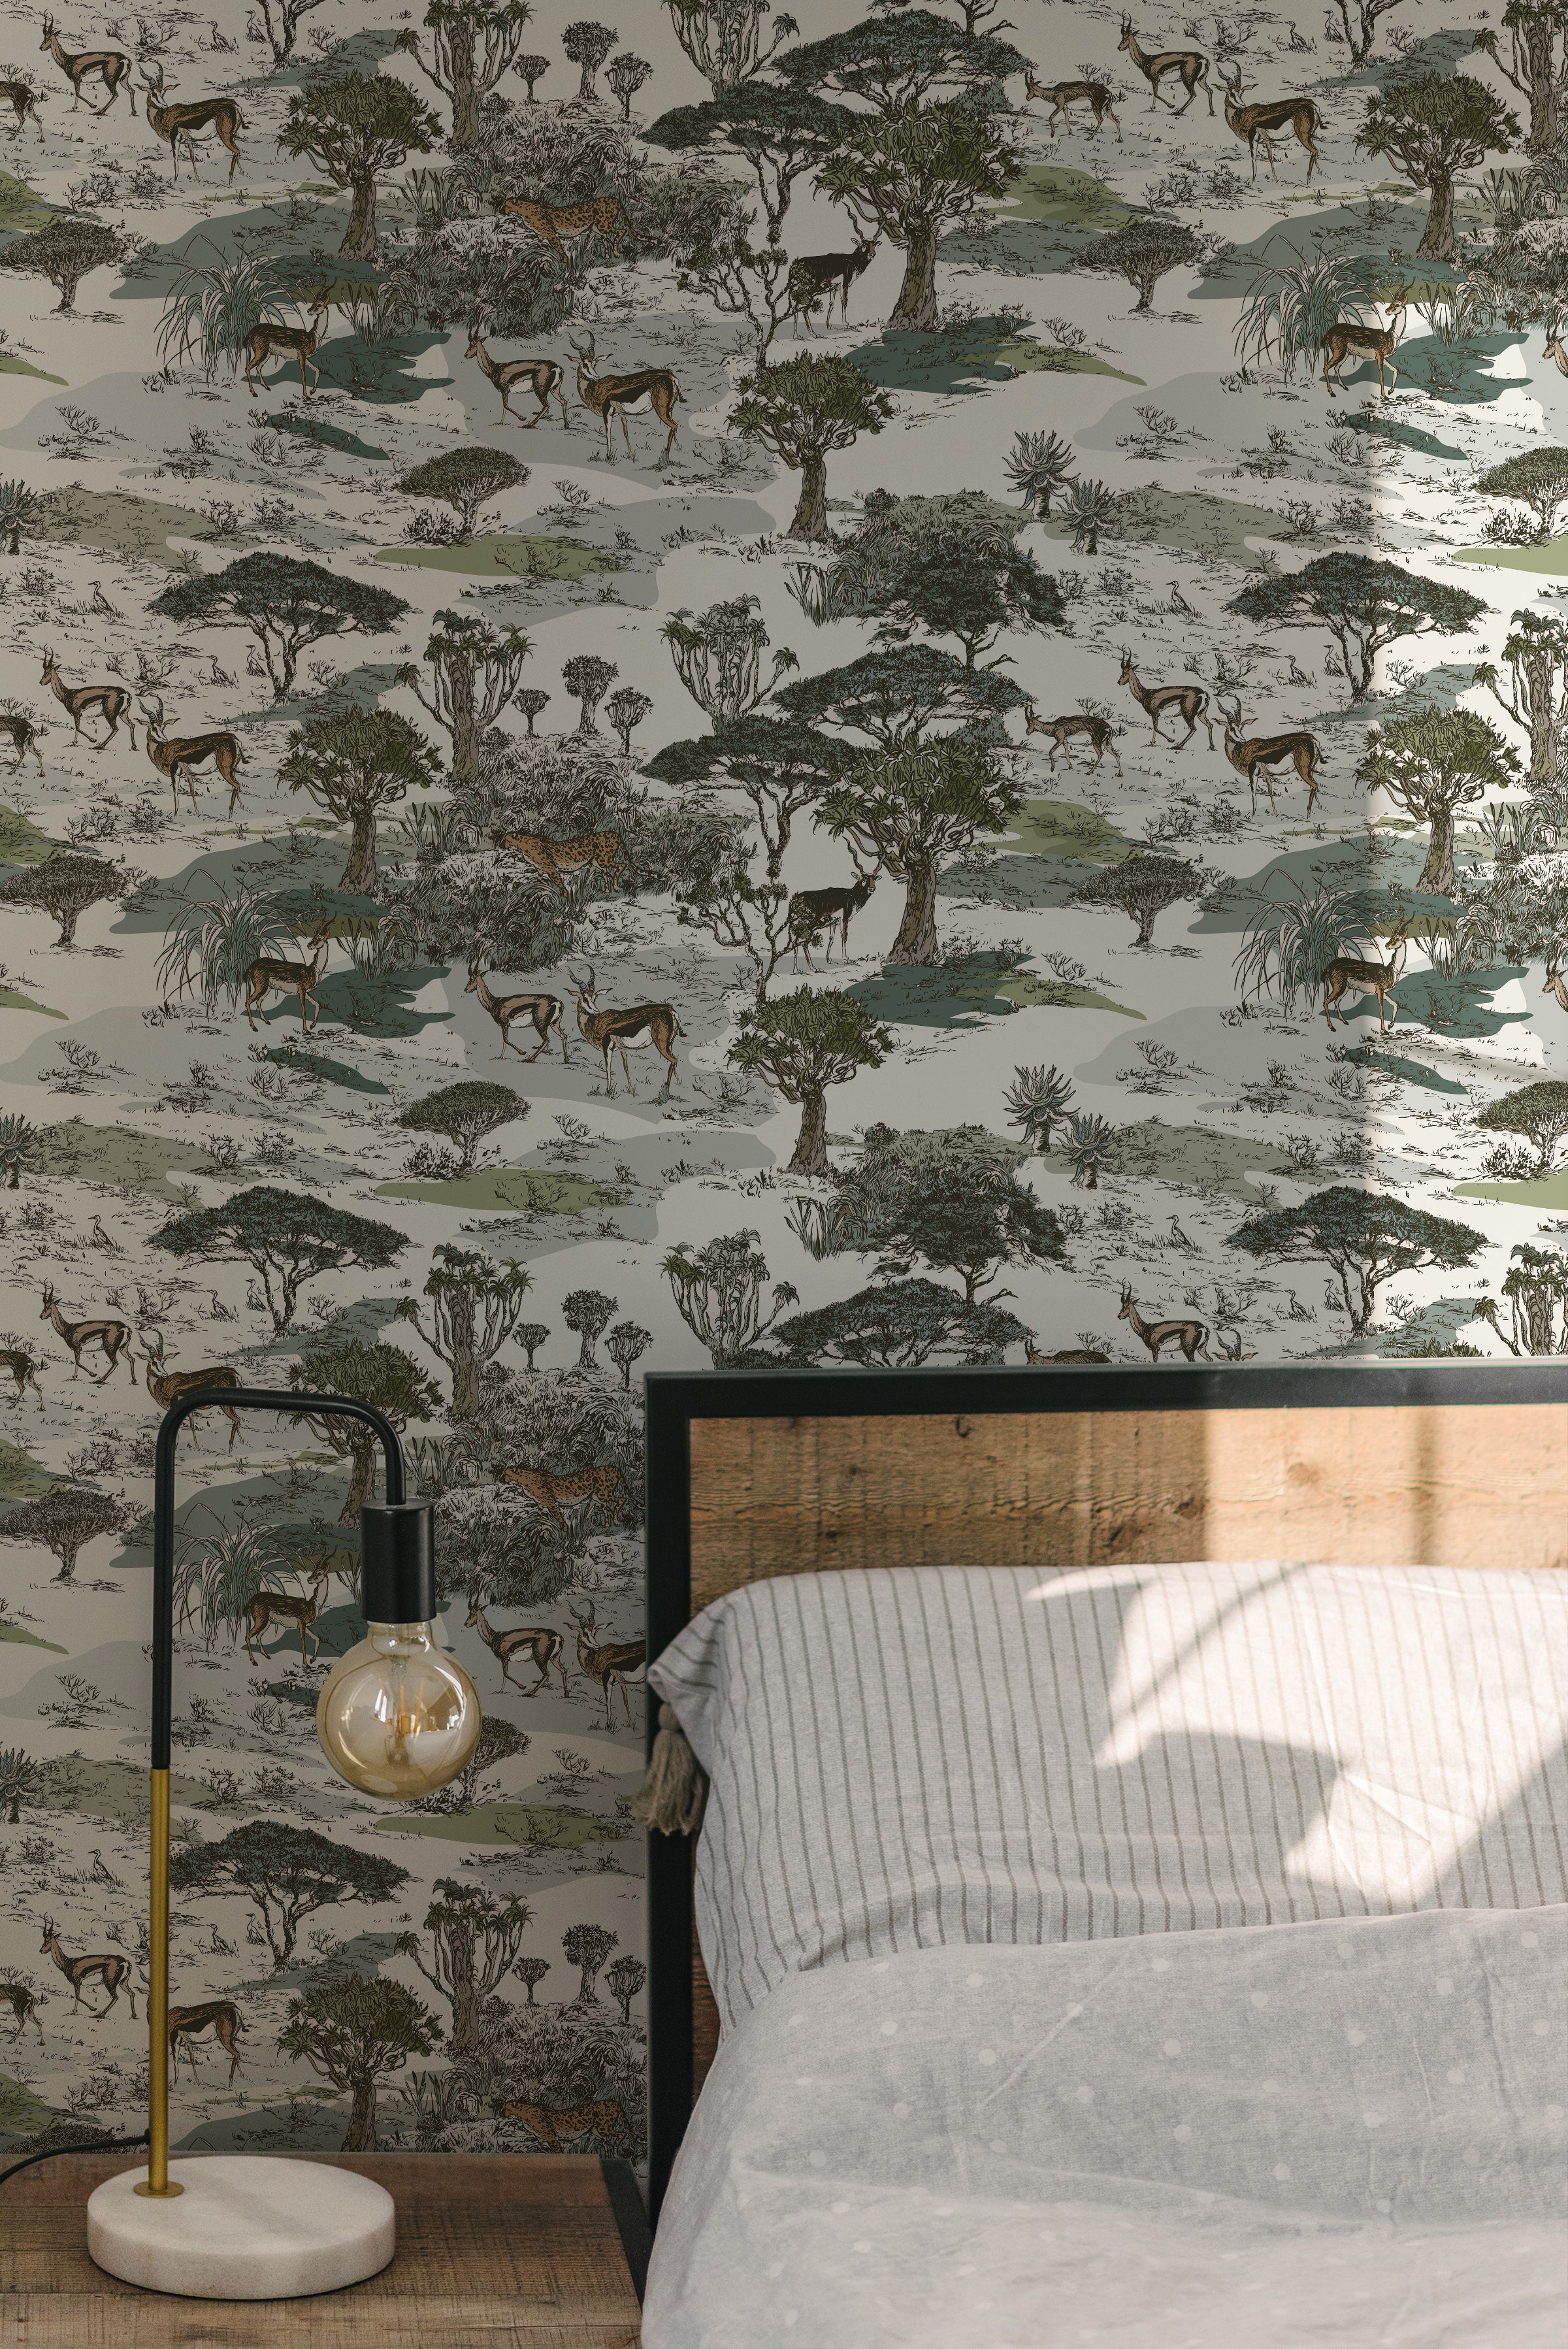 A bedroom showcasing the Serengeti Wallpaper as a feature wall behind a modern bed. The wallpaper’s intricate pattern of African wildlife and flora adds a dynamic and naturalistic element to the room, complemented by a simple bed frame and soft bedding